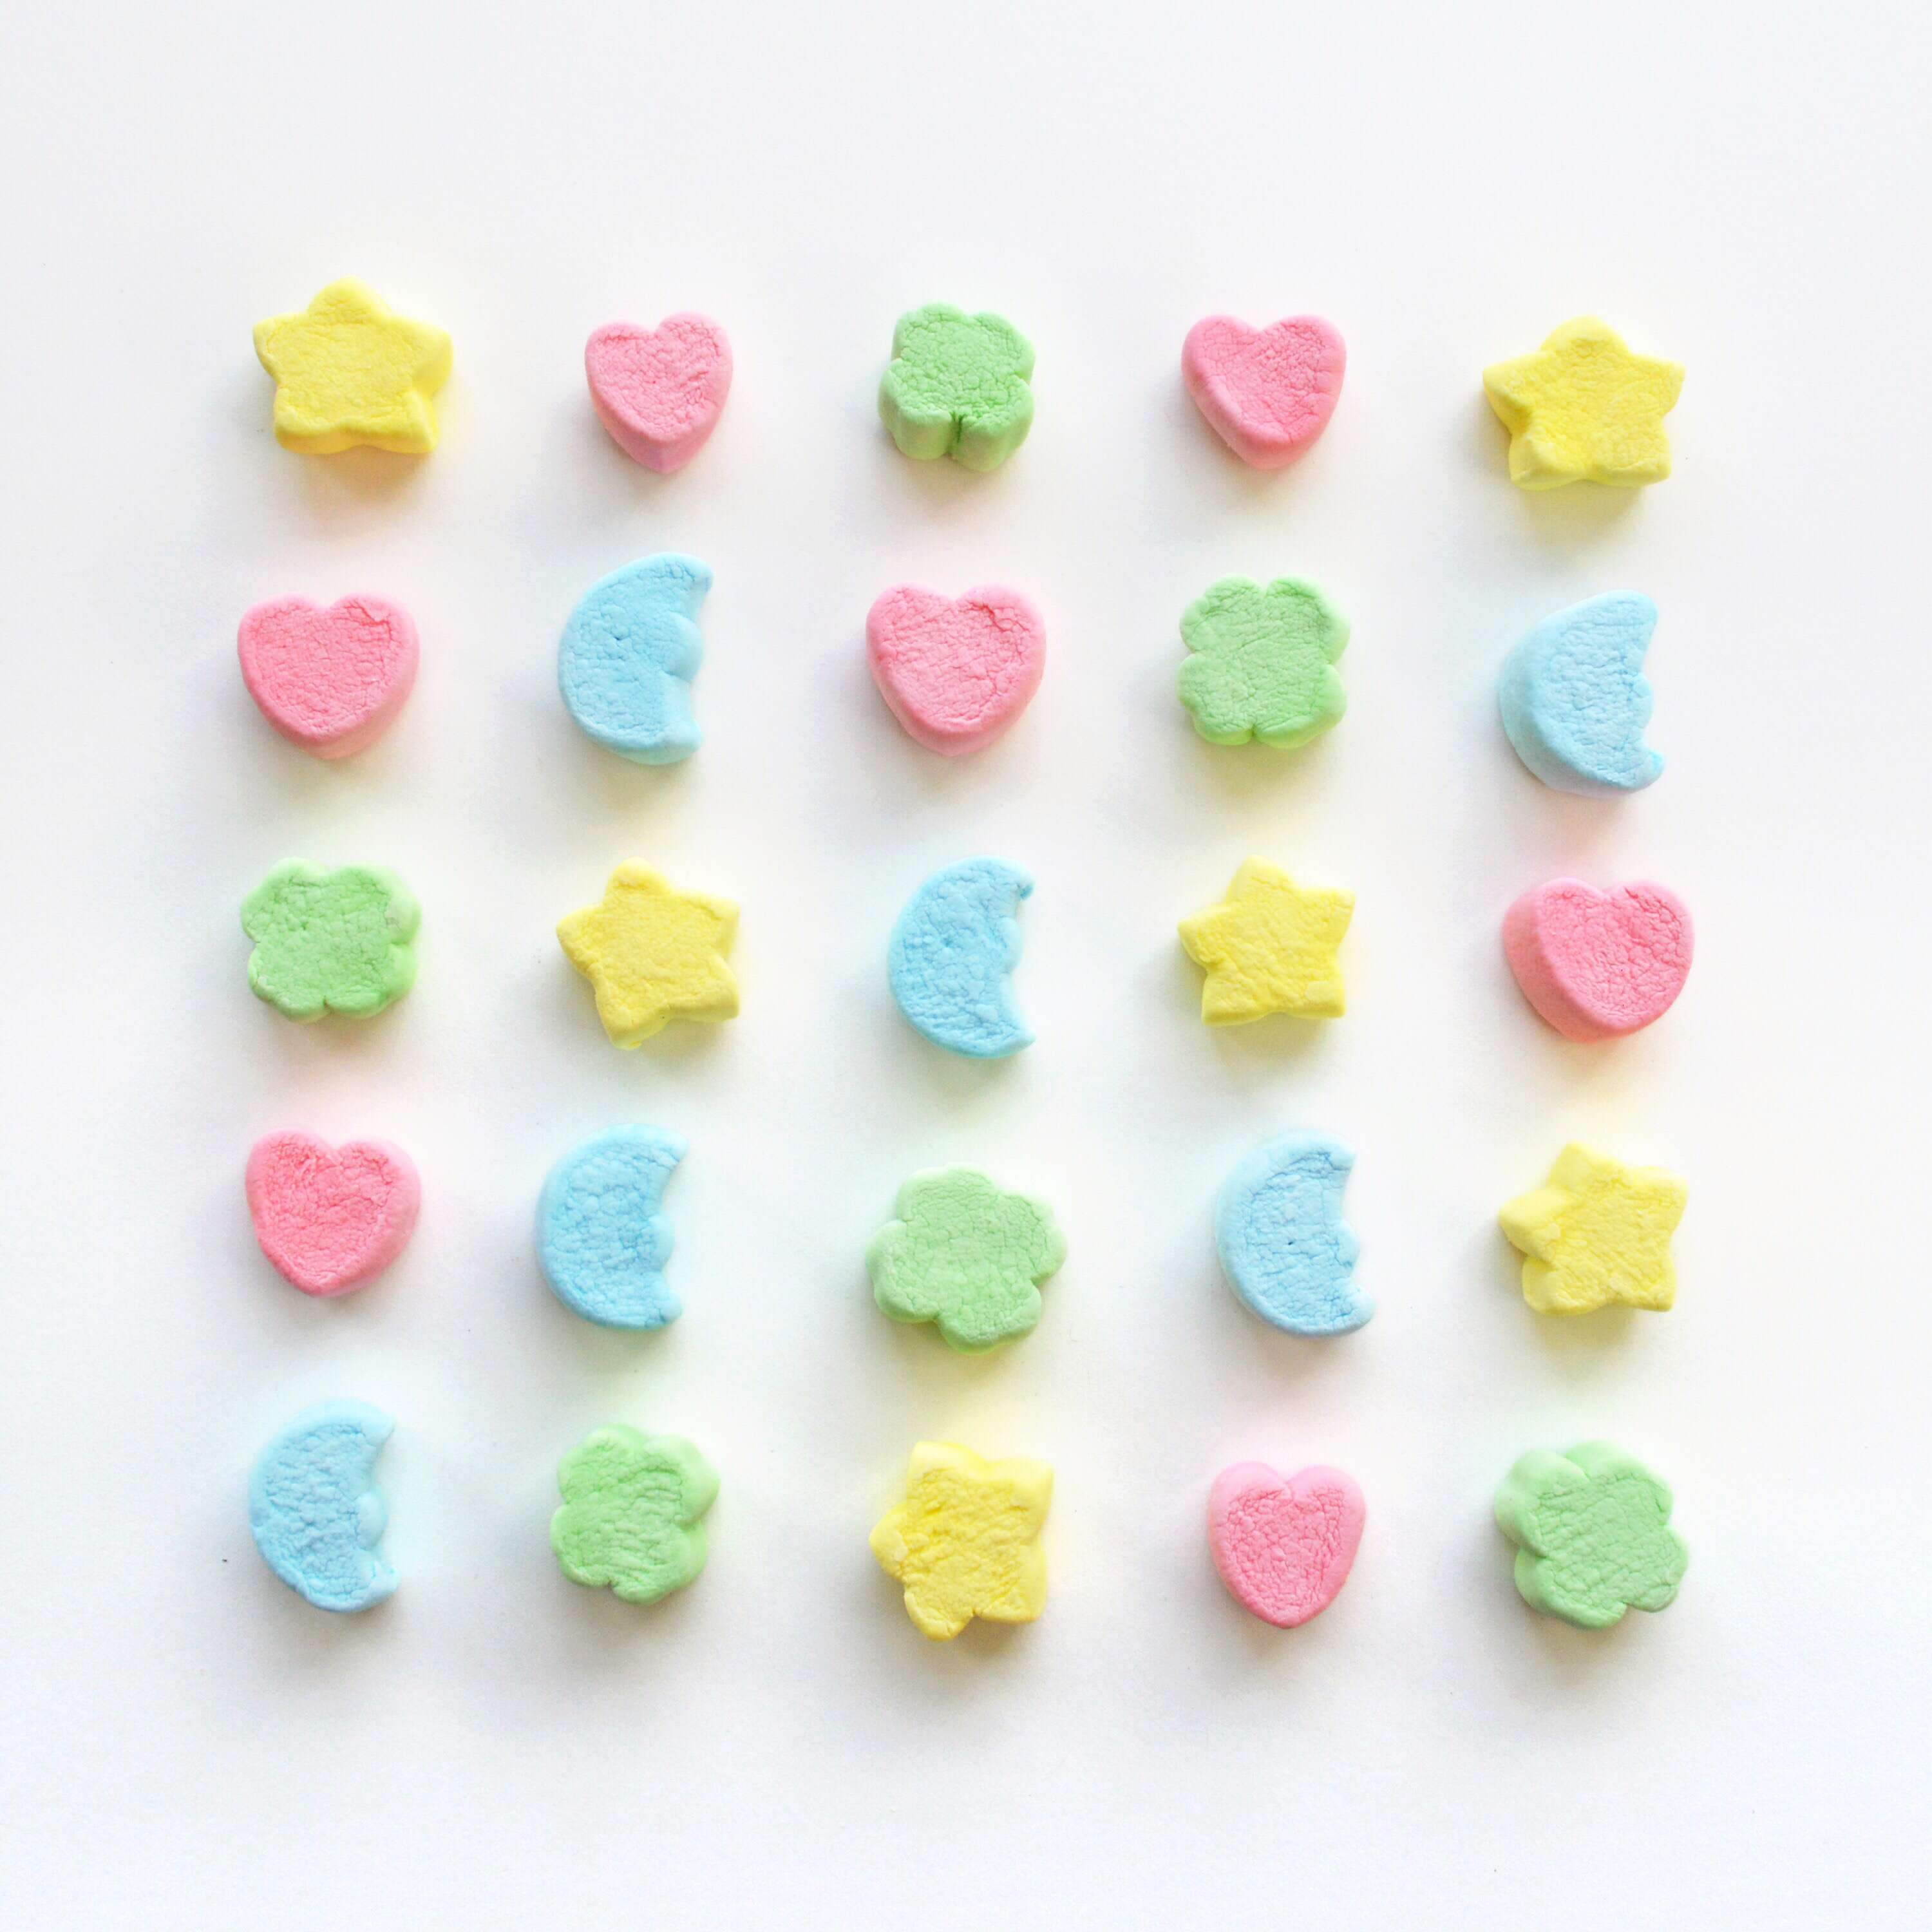 lucky charms marshmallow